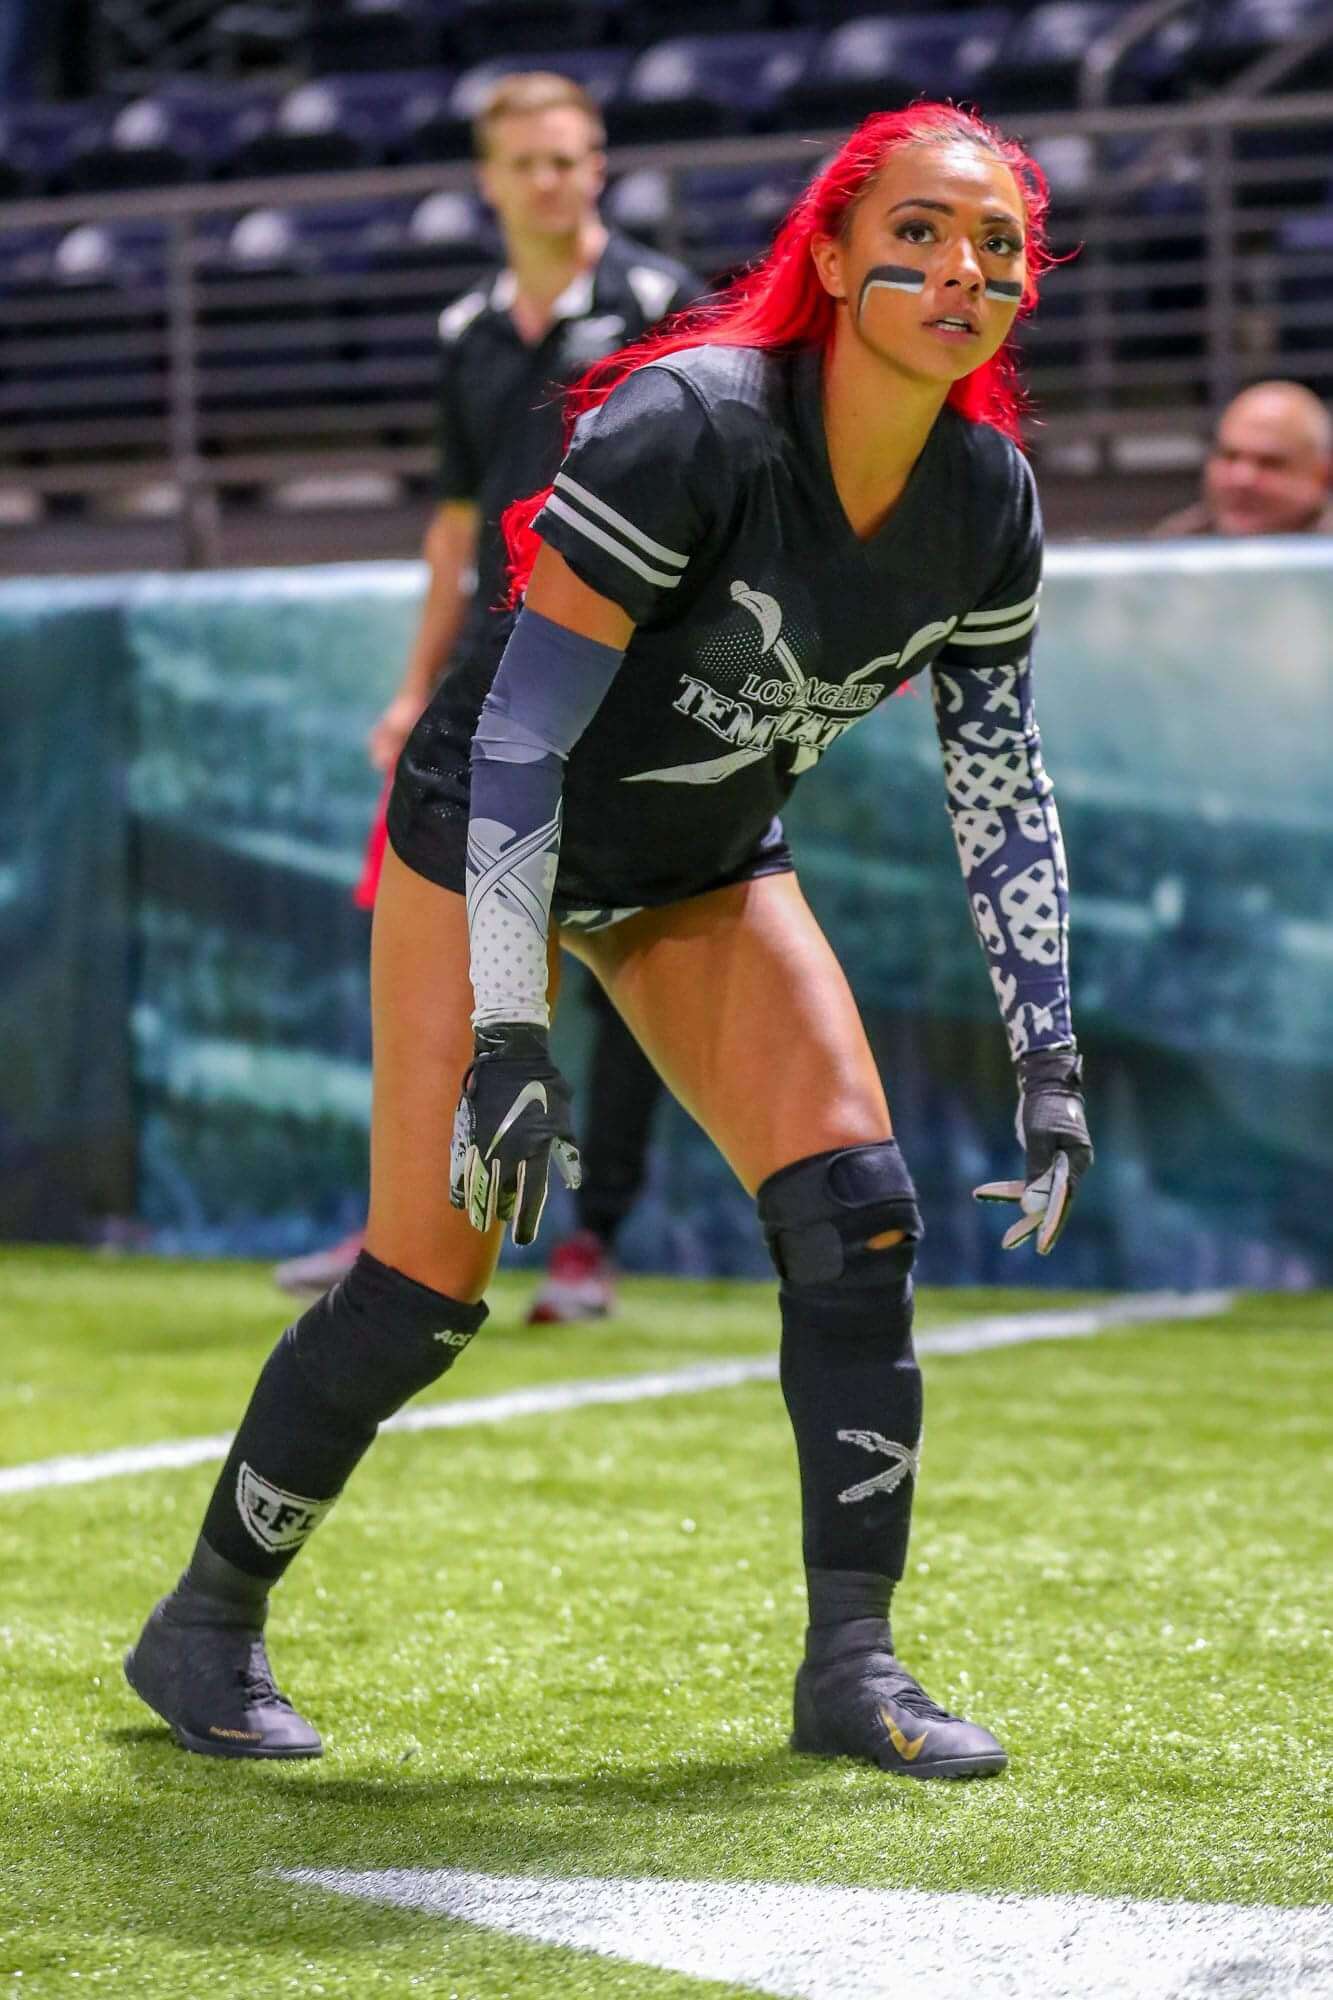 The Legends Football League Beautiful Women And Football, Need We Say Anymore! 54